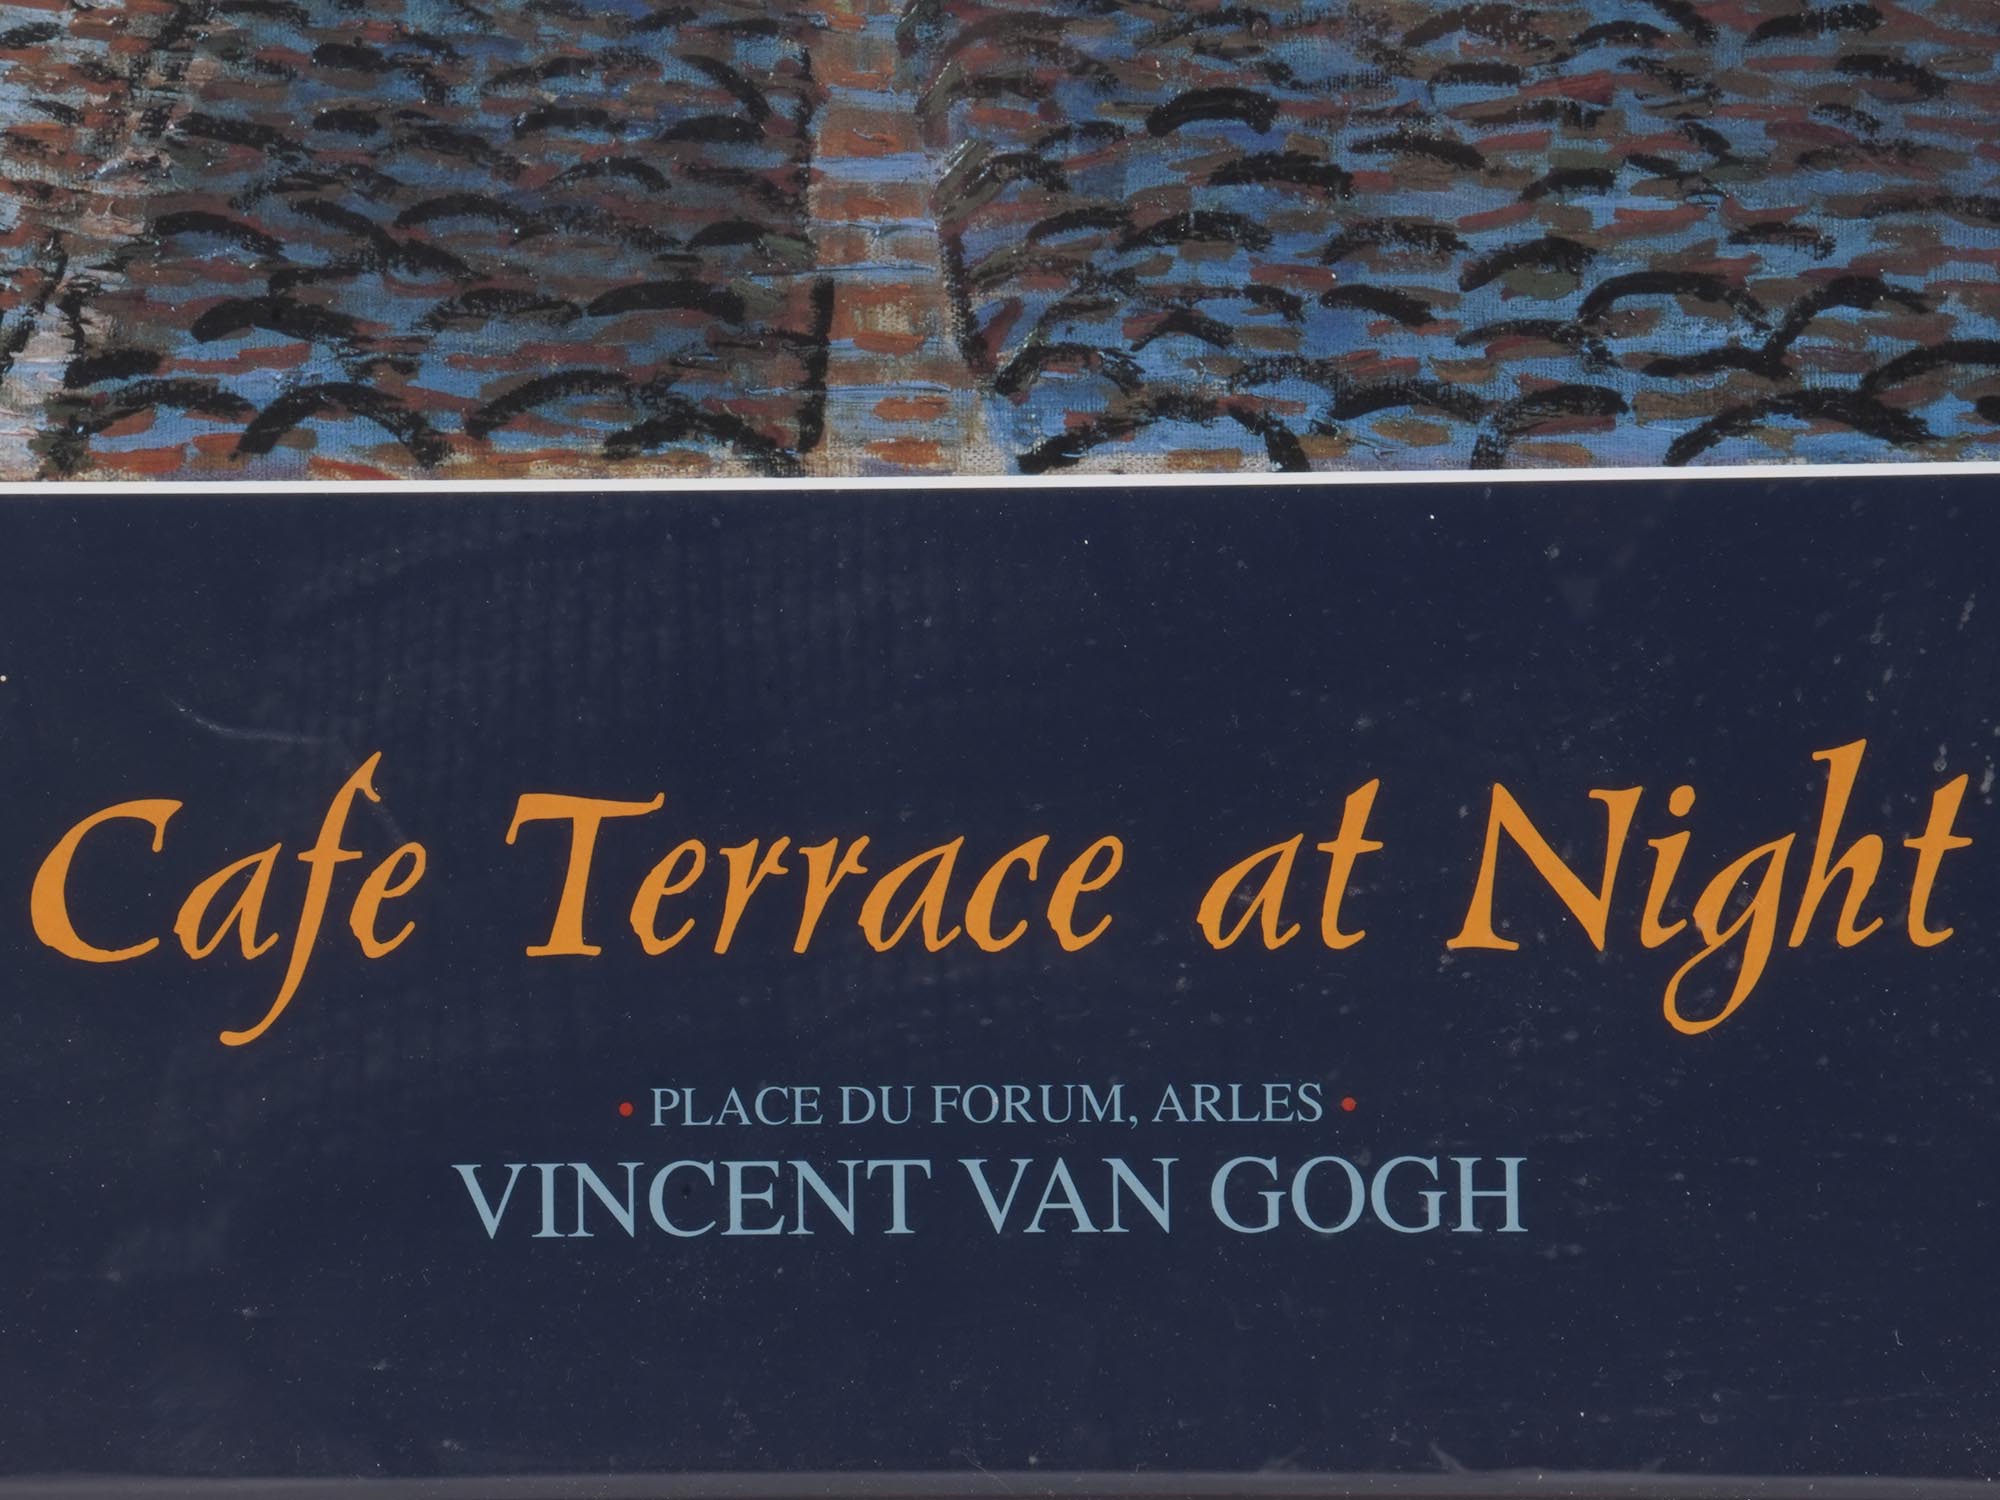 AFTER VAN GOGH LITHO POSTER CAFE TERRACE AT NIGHT PIC-2